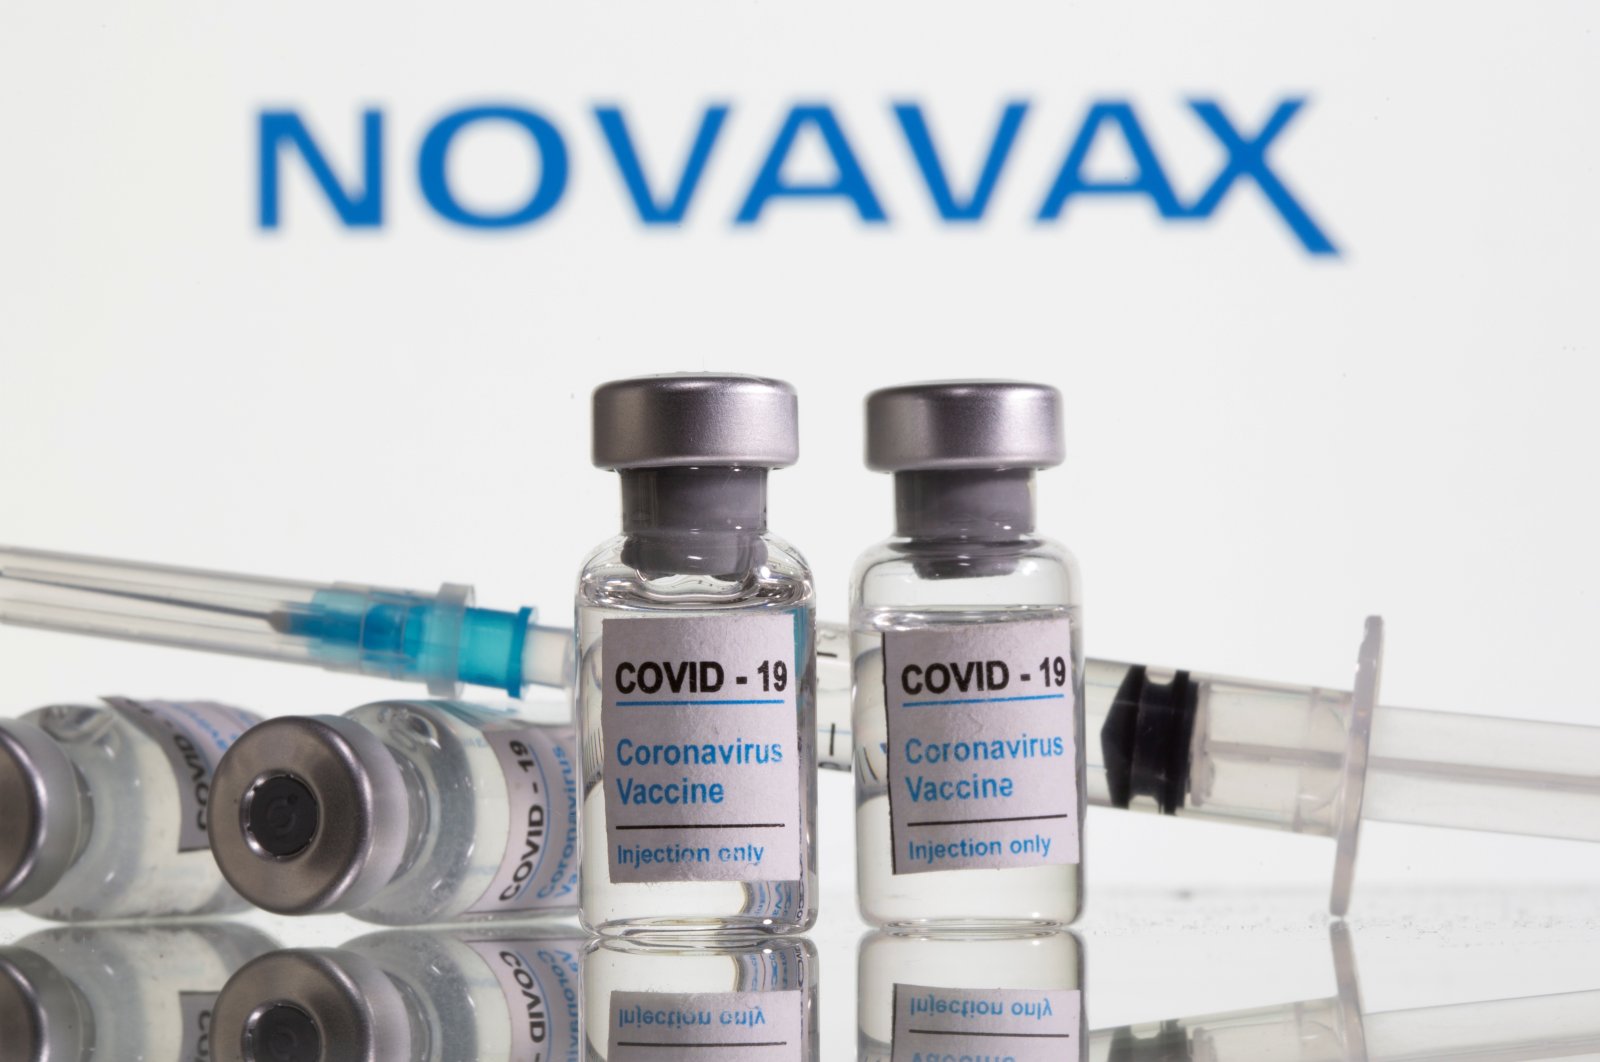 Vials labeled "COVID-19 Coronavirus Vaccine" and a syringe are seen in front of the Novavax logo in this illustration taken on Feb. 9, 2021. (Reuters Photo)